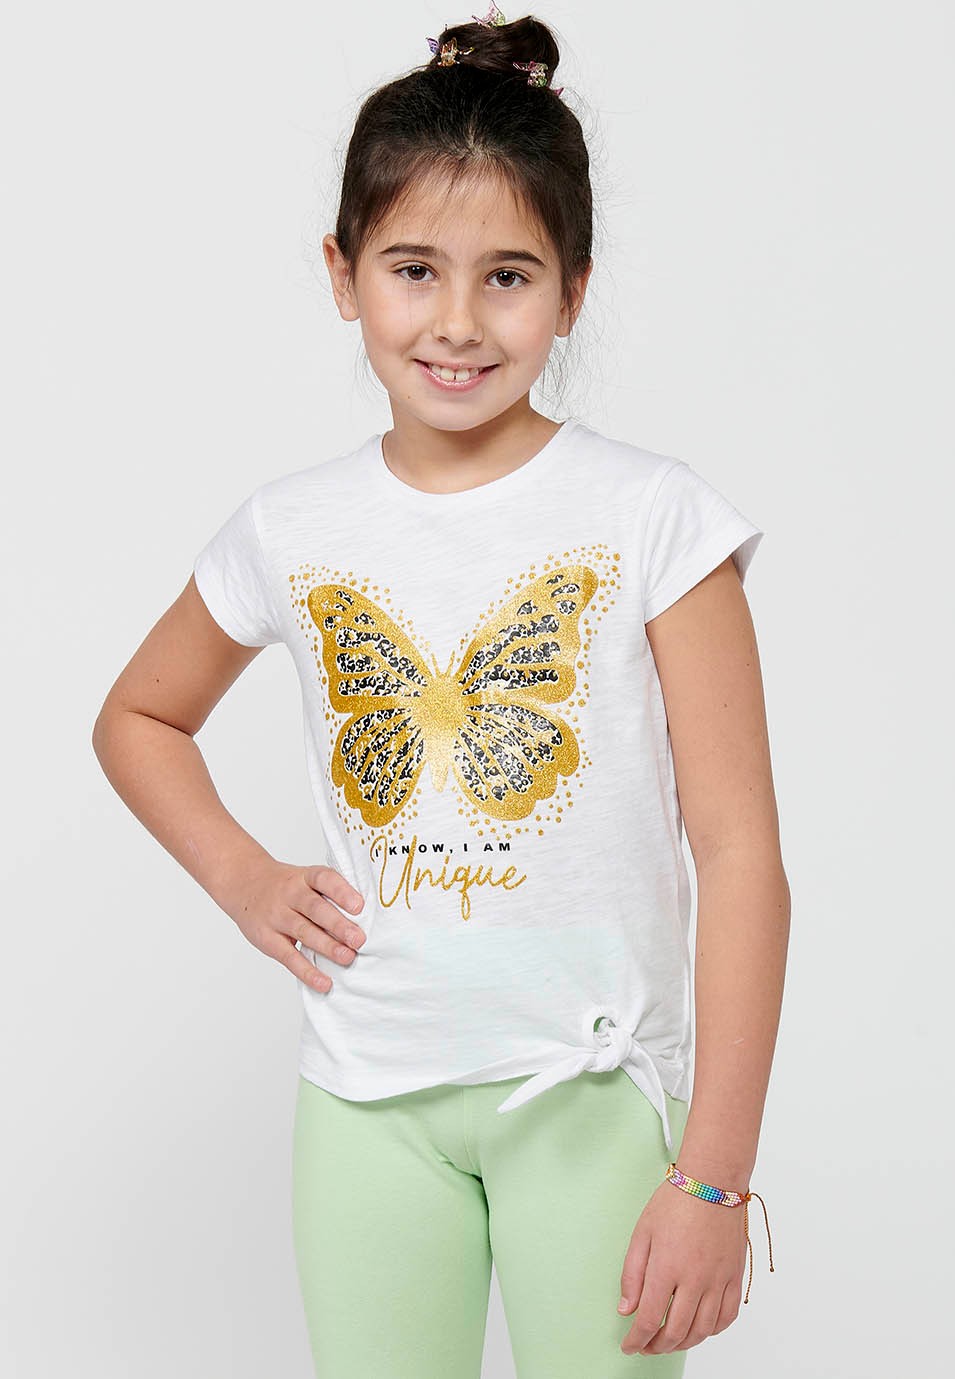 Short-sleeved T-shirt Round Neck Cotton Top with Front Print and White Front Detail for Girls 2